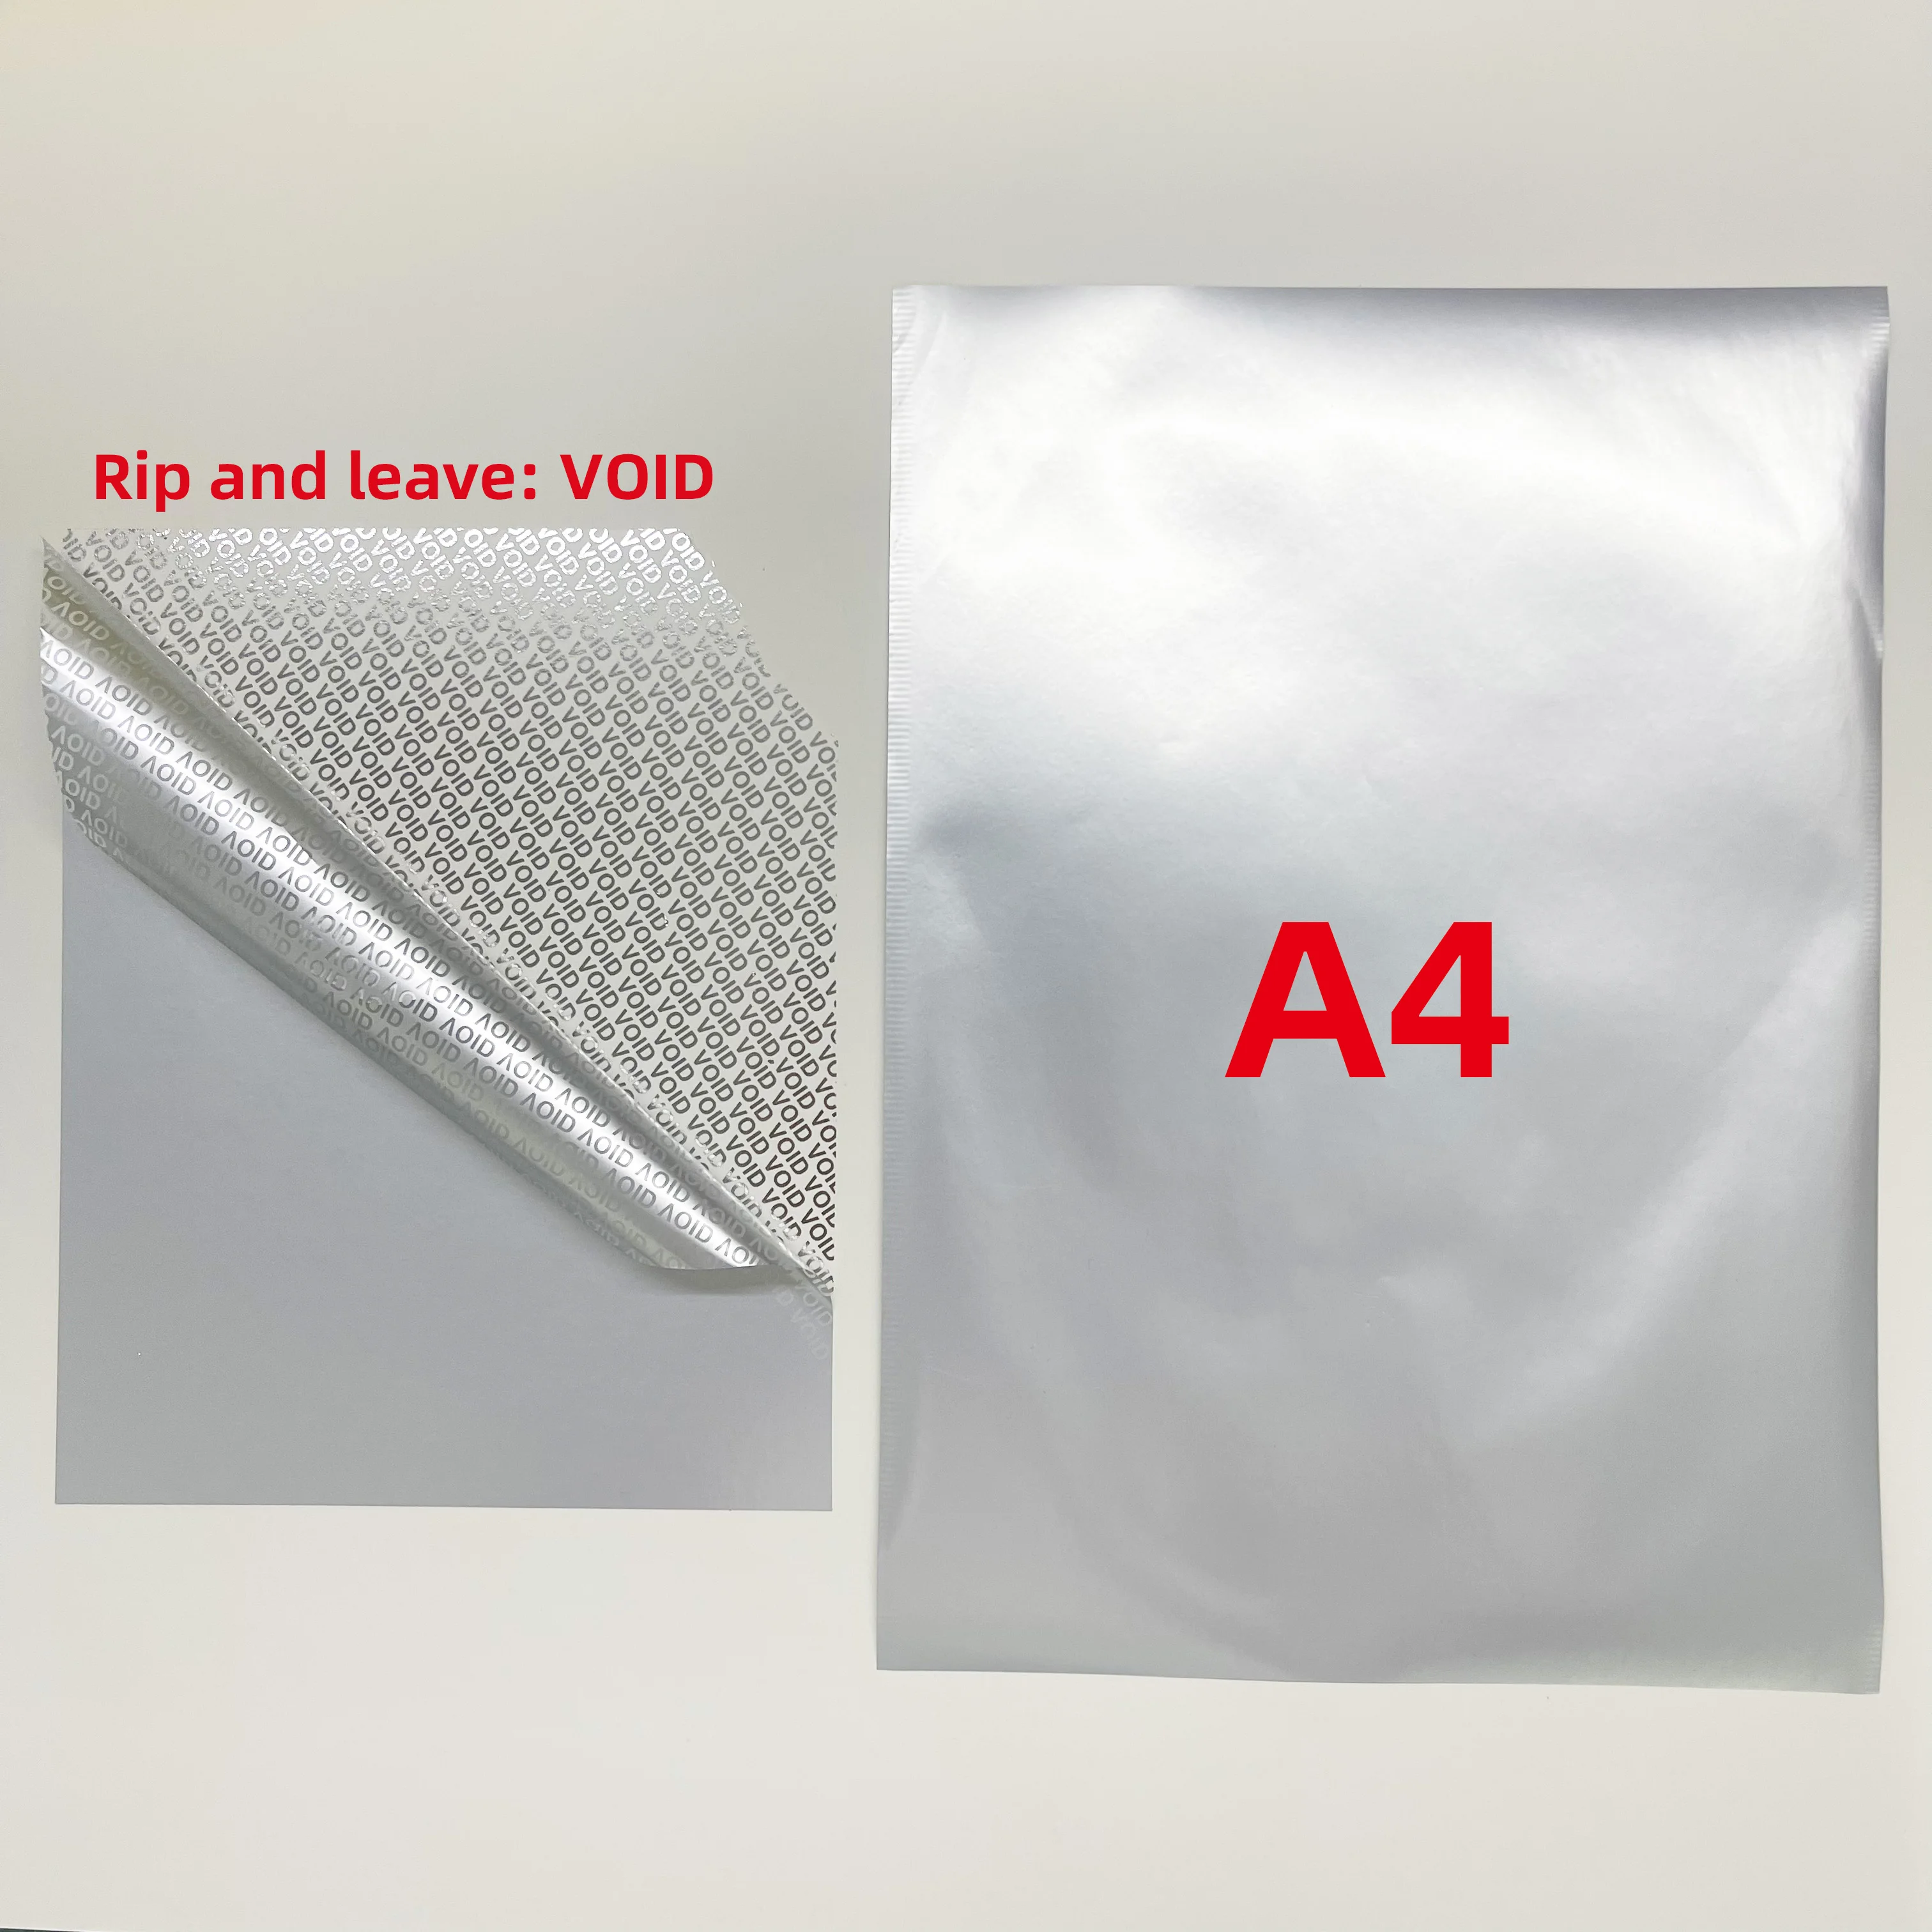 50 sheets/pack A4 dumb silver VOID anti-tear anti-tear label A4 blank printing material sticker tear invalid adhesive